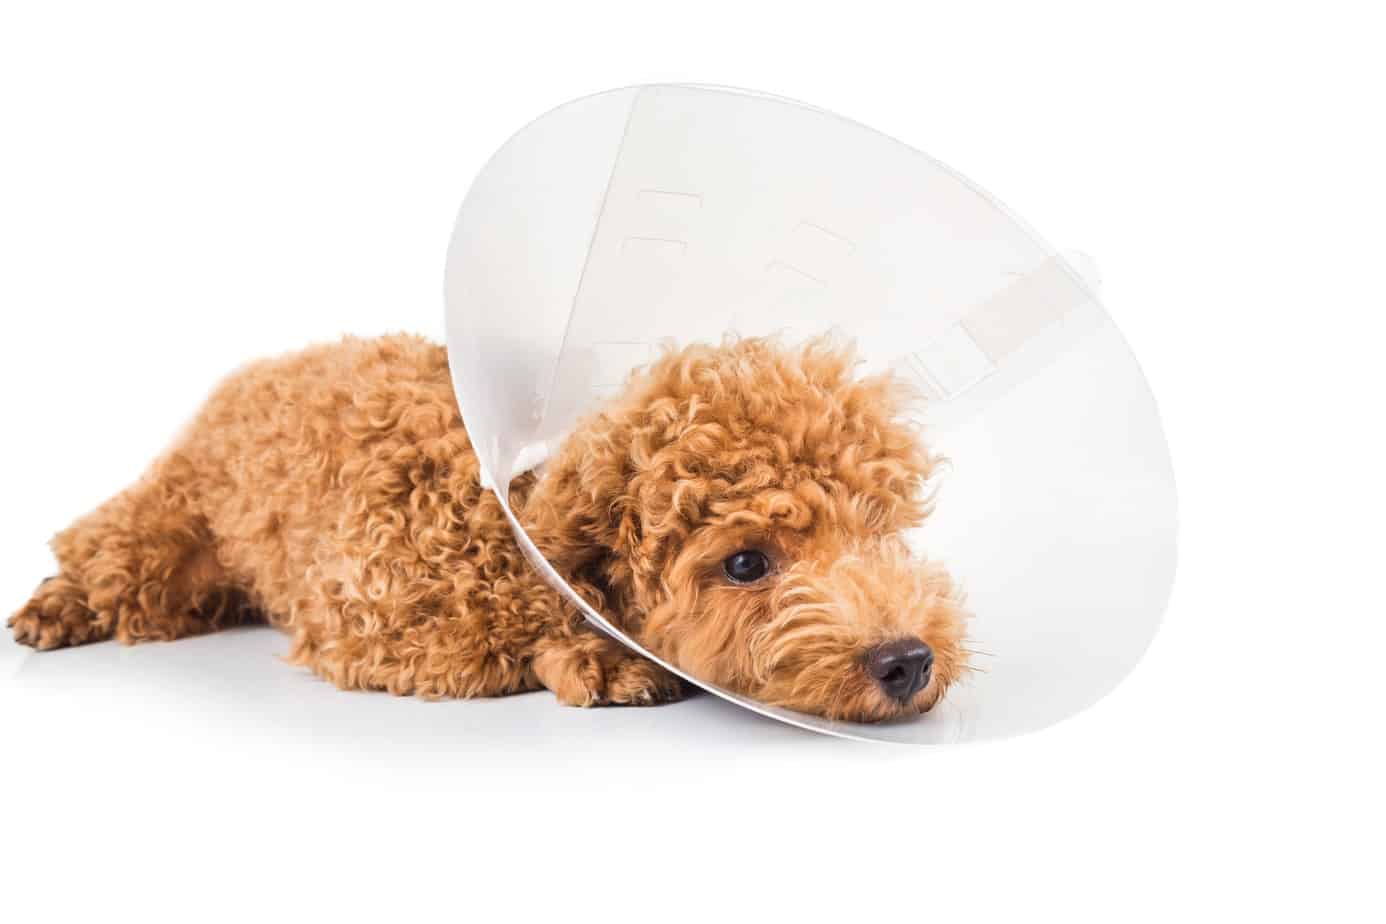 Care for your dog after neutering: Limit movement, use an e-collar